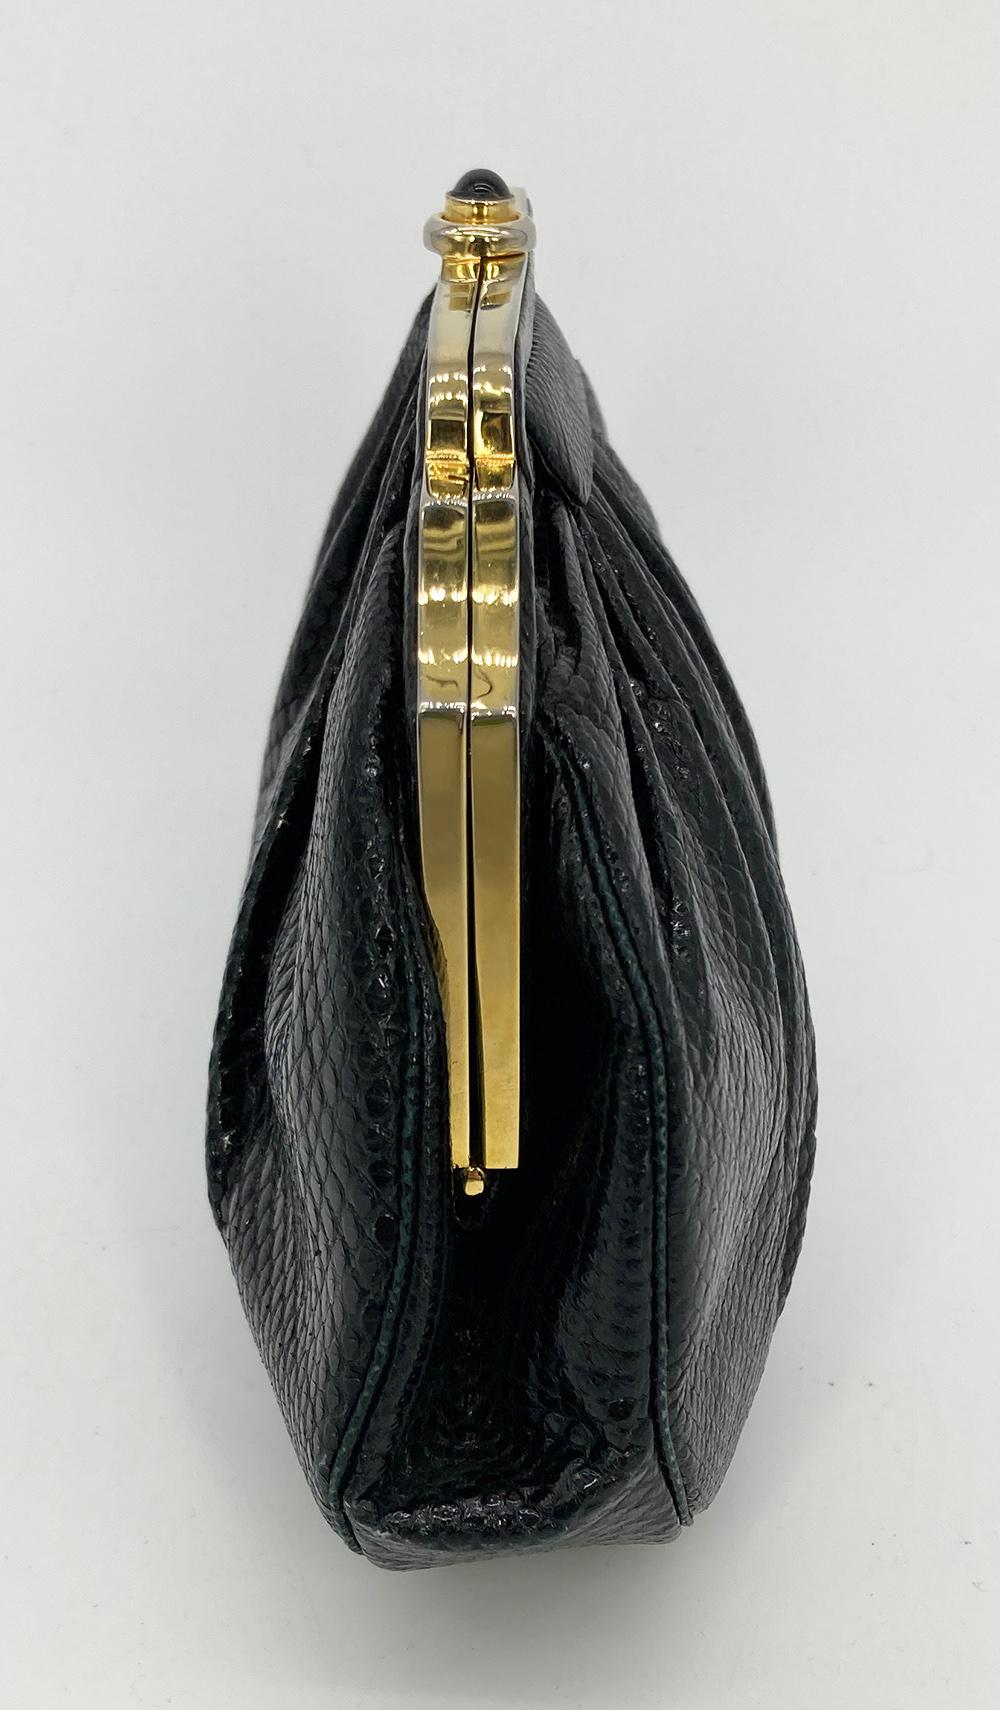 Judith Leiber Black Lizard Gold Deco Top Edge Clutch in very good condition. black lizard leather trimmed with a gold deco designed top edge. centered top button closure opens to a black satin interior with one slit and one zip side pocket and